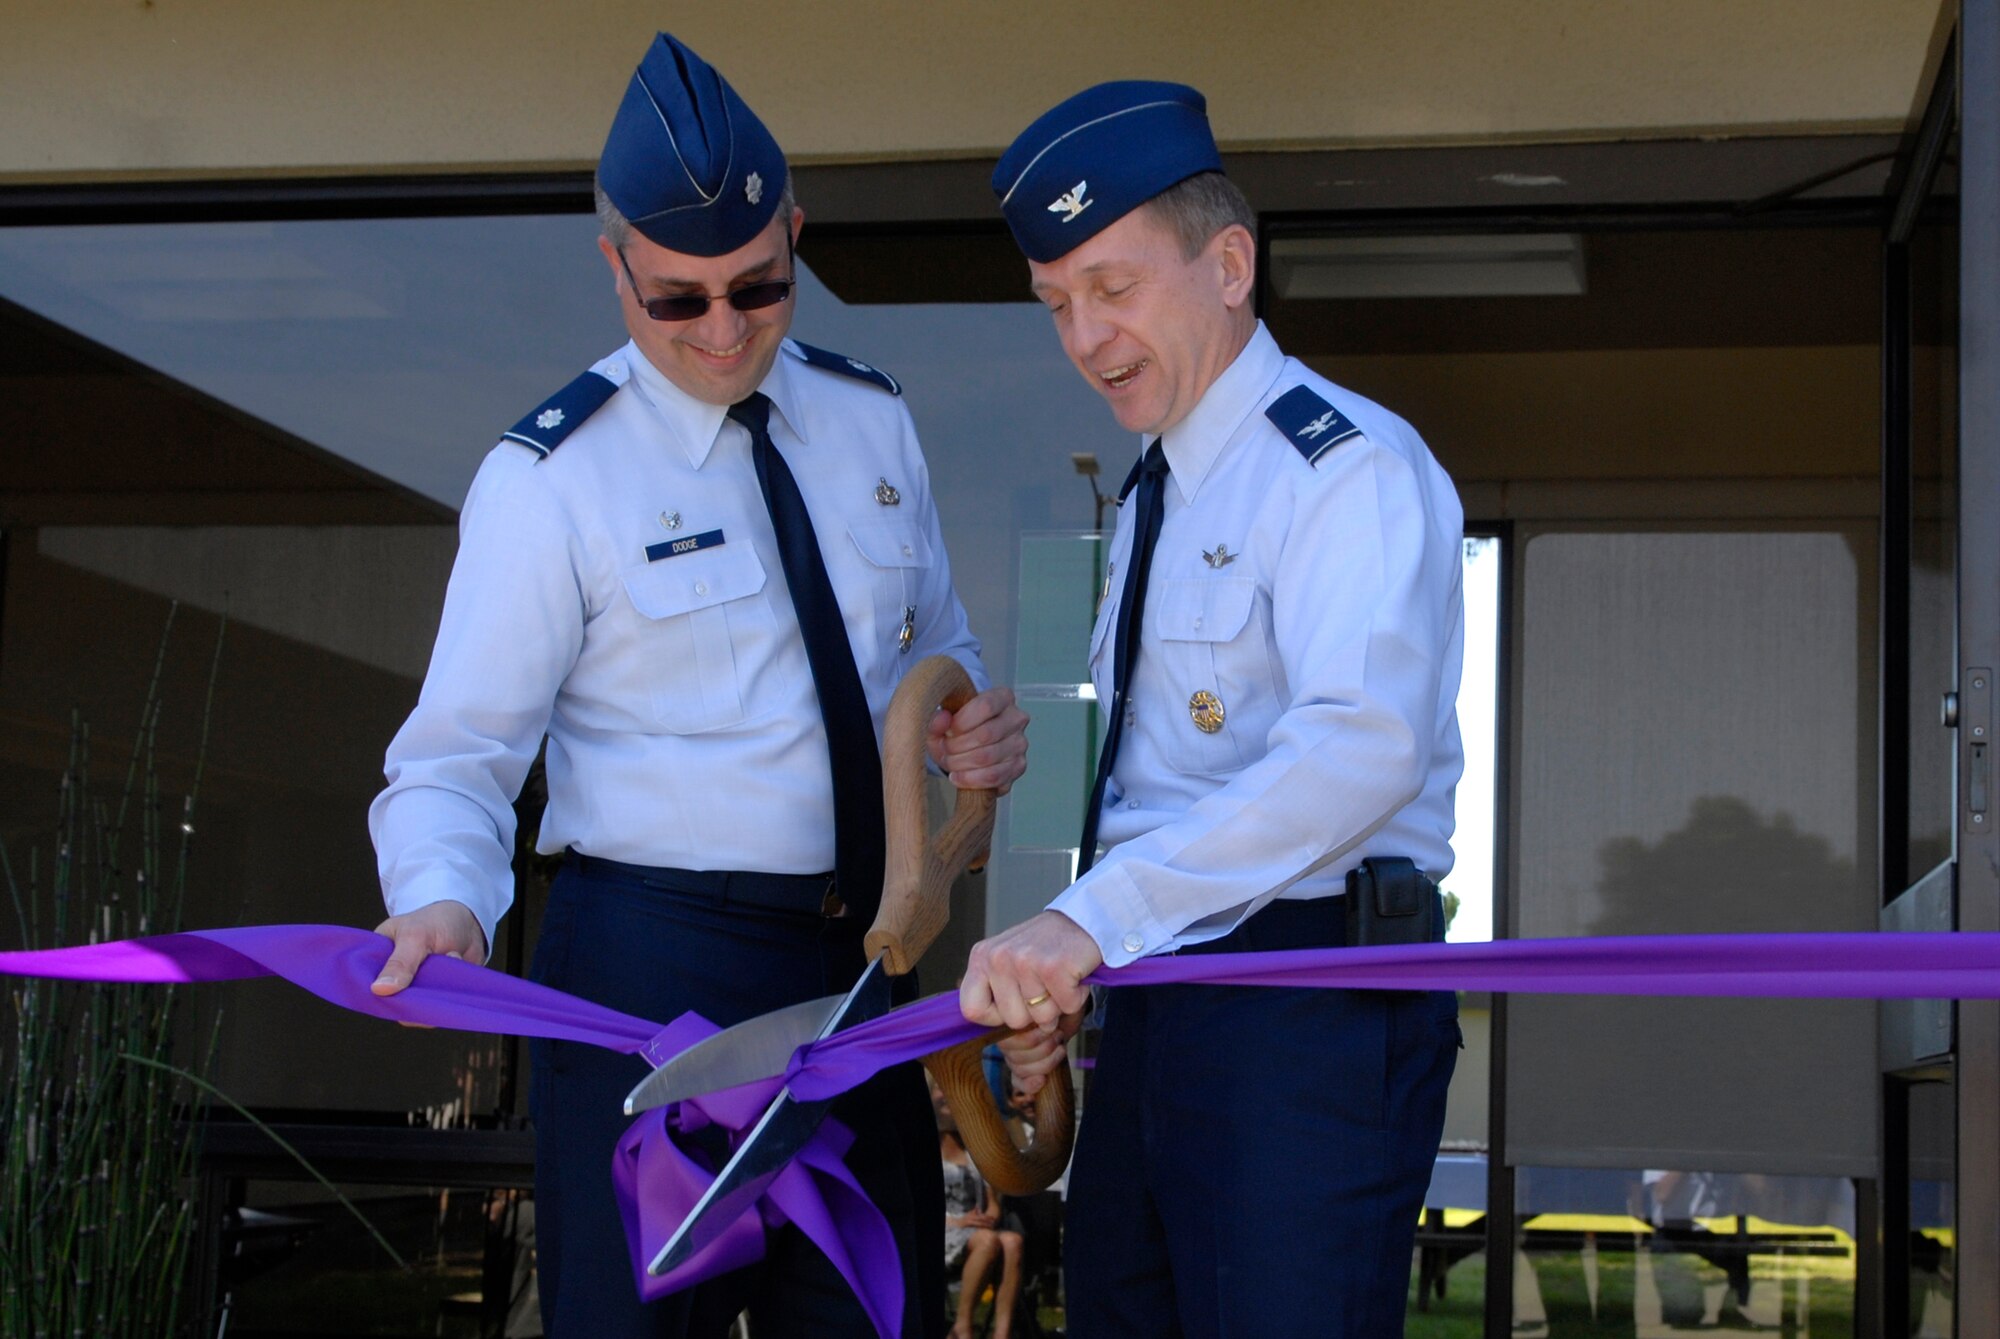 VANDENBERG AIR FORCE BASE, Calif. -- Col. David Buck, the 30th Space Wing commander, and Lt. Col. Timothy Dodge, the 30th Civil Engineer Squadron commander, cut the ribbon celebrating the opening of a remodeled 30th CES facility during a ceremony here Monday, March 22, 2010. (U.S. Air Force photo/Senior Airman Andrew Satran) 

 
 